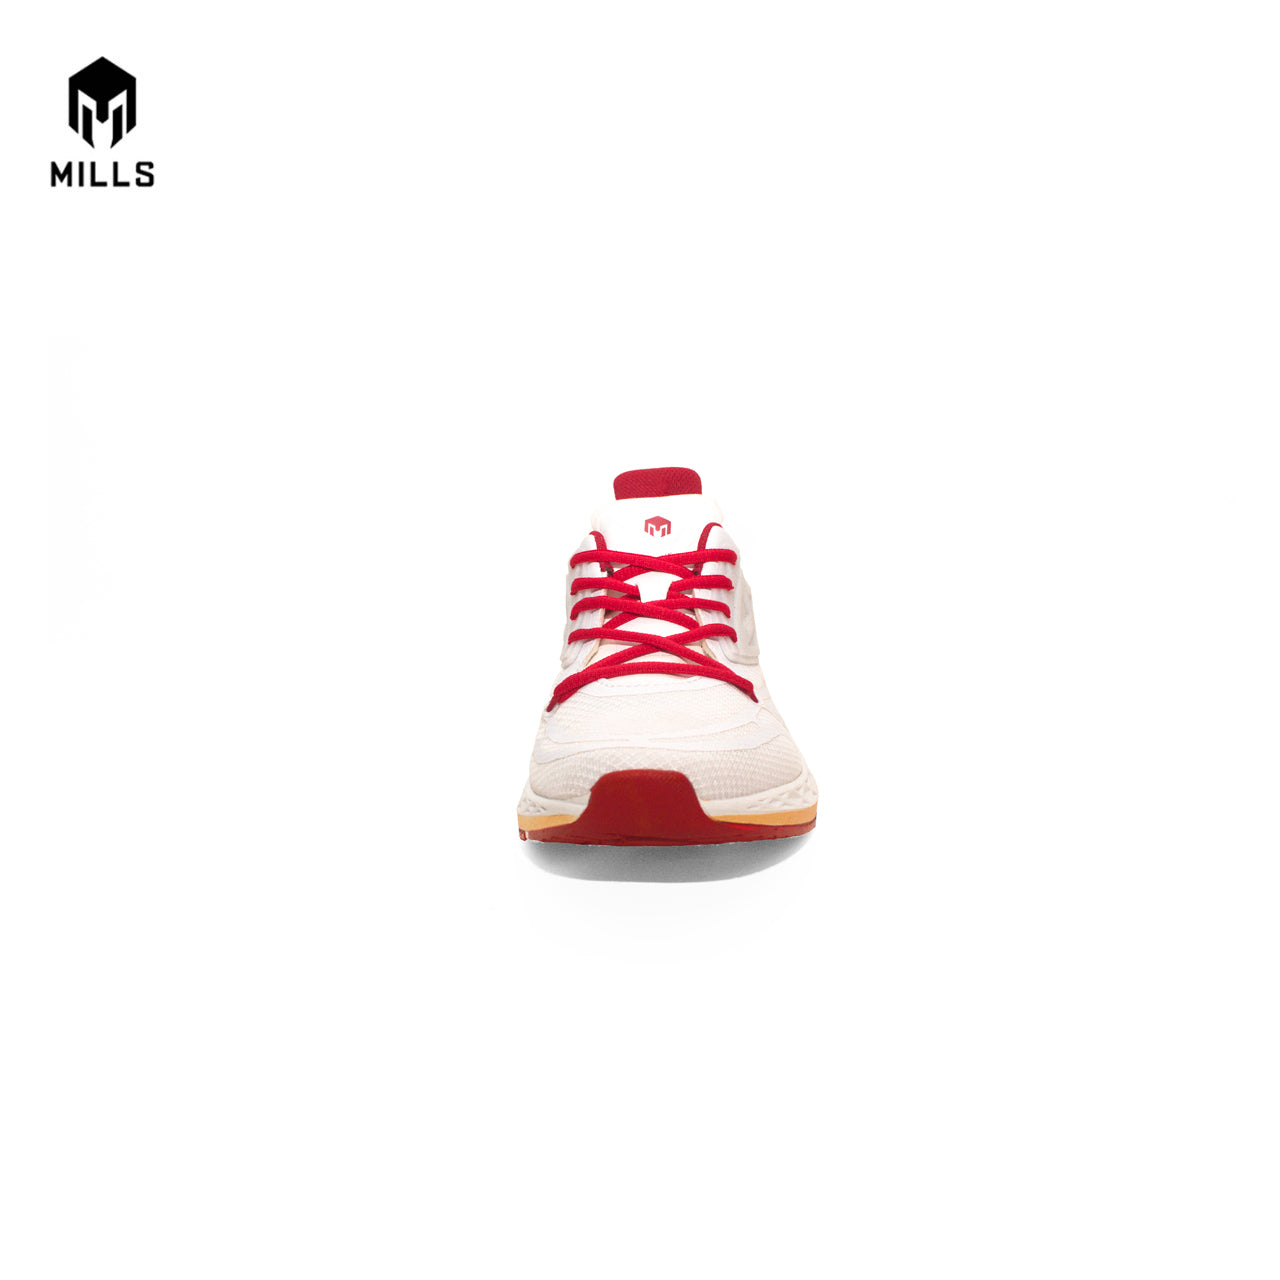 MILLS TREXIMO HYDRA WHITE/RED/GOLD 9100205